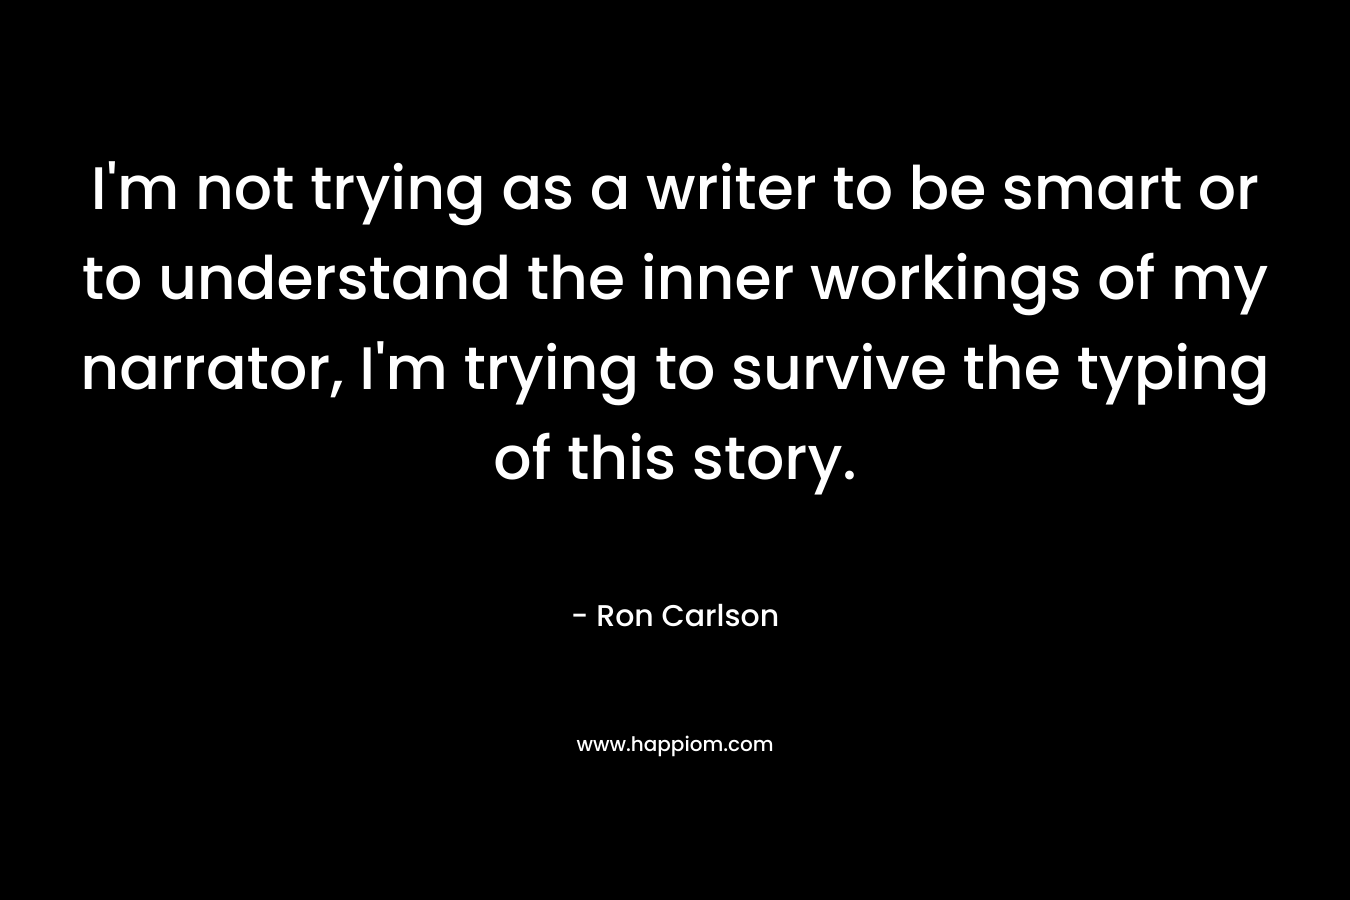 I’m not trying as a writer to be smart or to understand the inner workings of my narrator, I’m trying to survive the typing of this story. – Ron Carlson